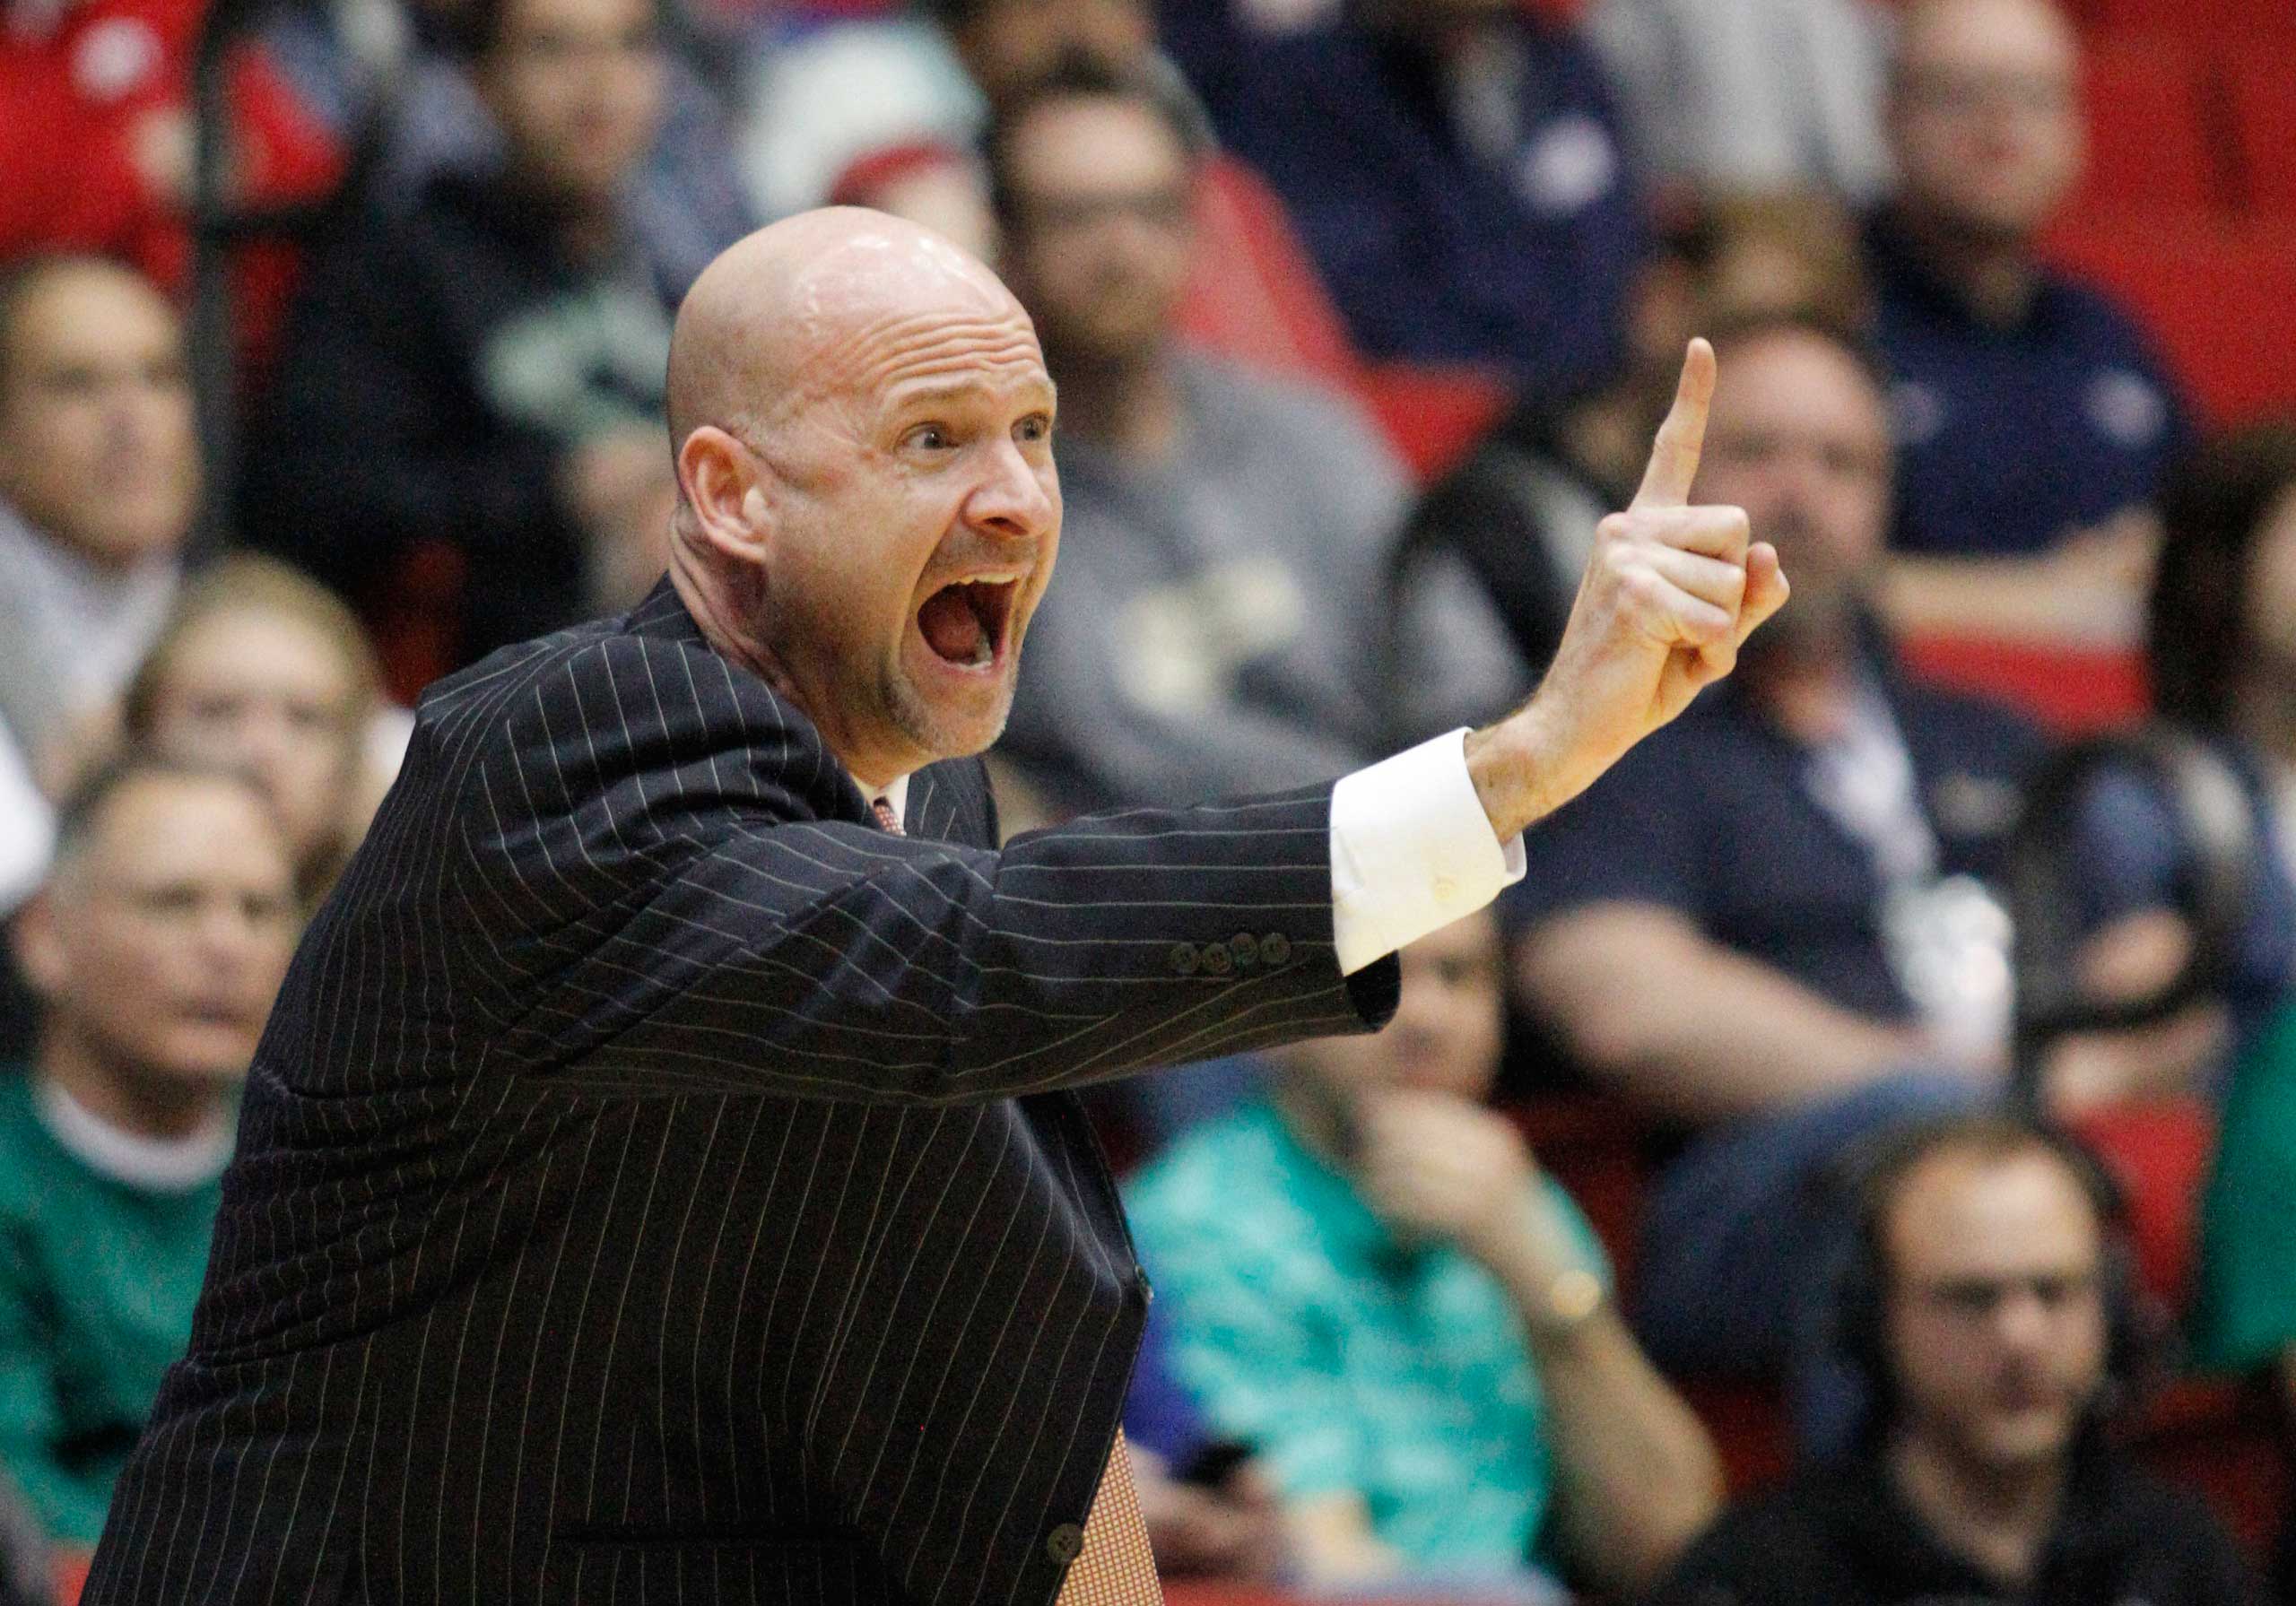 Mississippi head coach Andy Kennedy signals his team in the second half of a first round NCAA tournament game against Brigham Young in Dayton, Ohio, March 17, 2015.